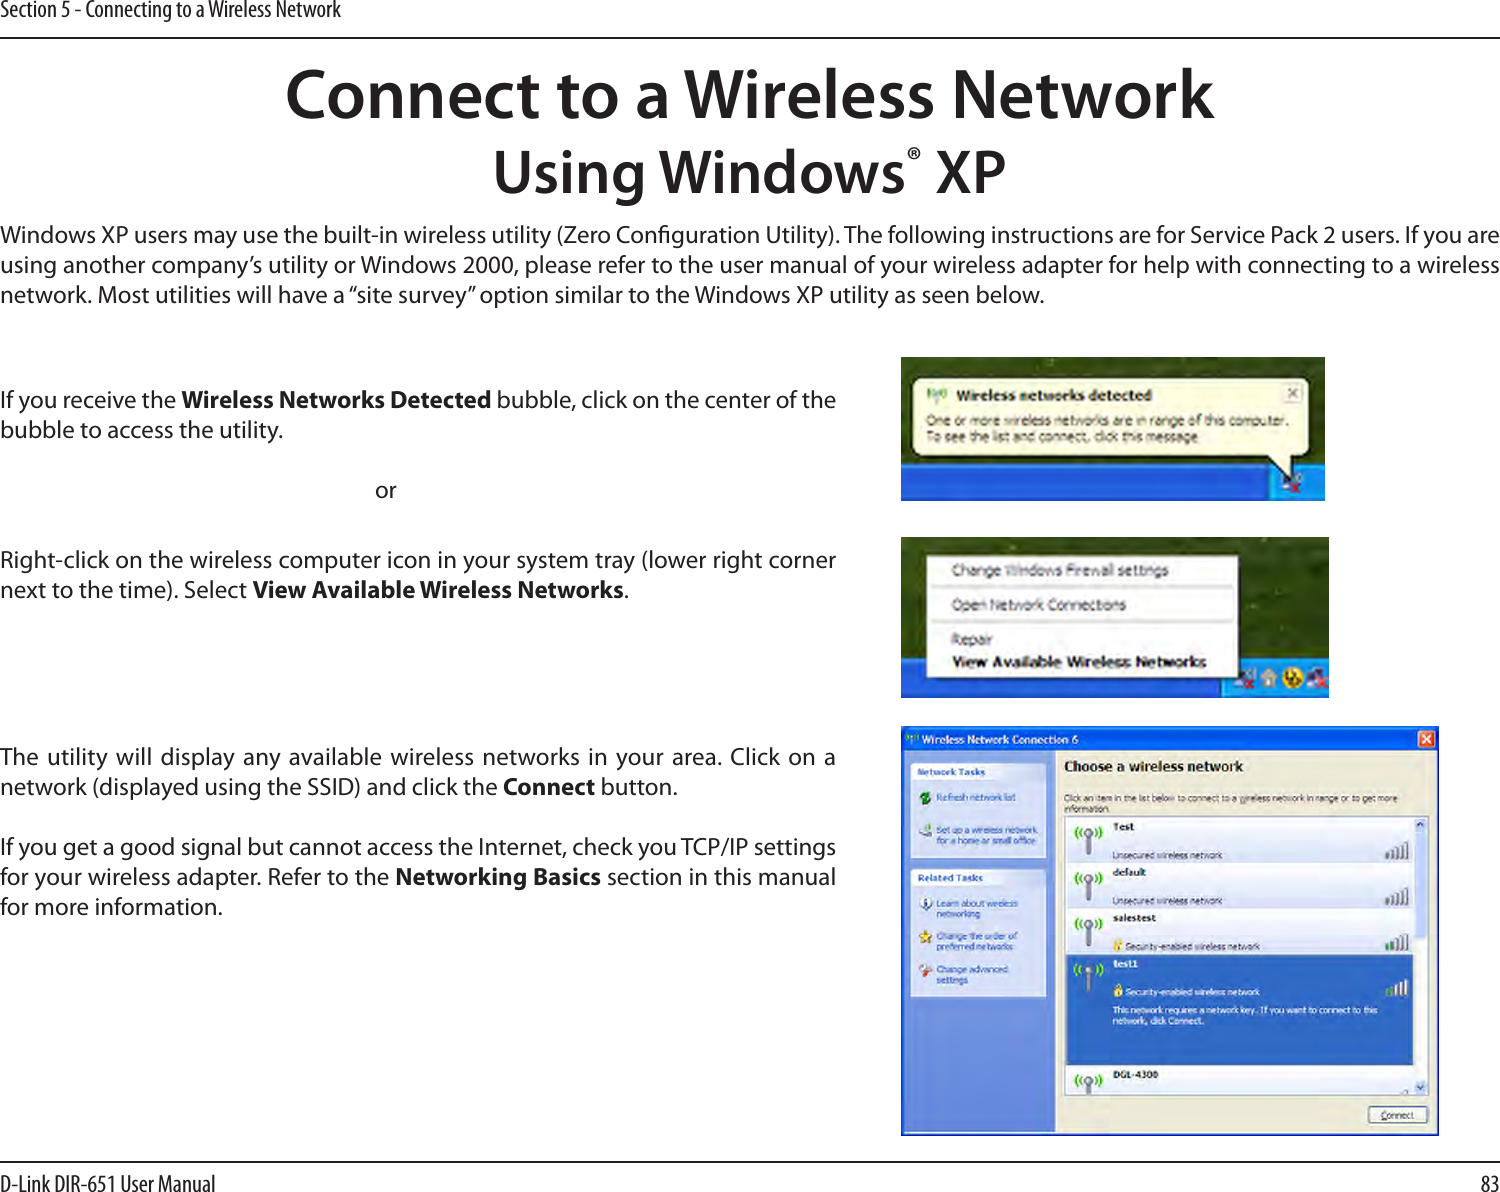 83D-Link DIR-651 User ManualSection 5 - Connecting to a Wireless NetworkConnect to a Wireless NetworkUsing Windows® XPWindows XP users may use the built-in wireless utility (Zero Conguration Utility). The following instructions are for Service Pack 2 users. If you are using another company’s utility or Windows 2000, please refer to the user manual of your wireless adapter for help with connecting to a wireless network. Most utilities will have a “site survey” option similar to the Windows XP utility as seen below.Right-click on the wireless computer icon in your system tray (lower right corner next to the time). Select View Available Wireless Networks.If you receive the Wireless Networks Detected bubble, click on the center of the bubble to access the utility.     orThe utility  will display any available wireless networks  in your area. Click on a network (displayed using the SSID) and click the Connect button.If you get a good signal but cannot access the Internet, check you TCP/IP settings for your wireless adapter. Refer to the Networking Basics section in this manual for more information.